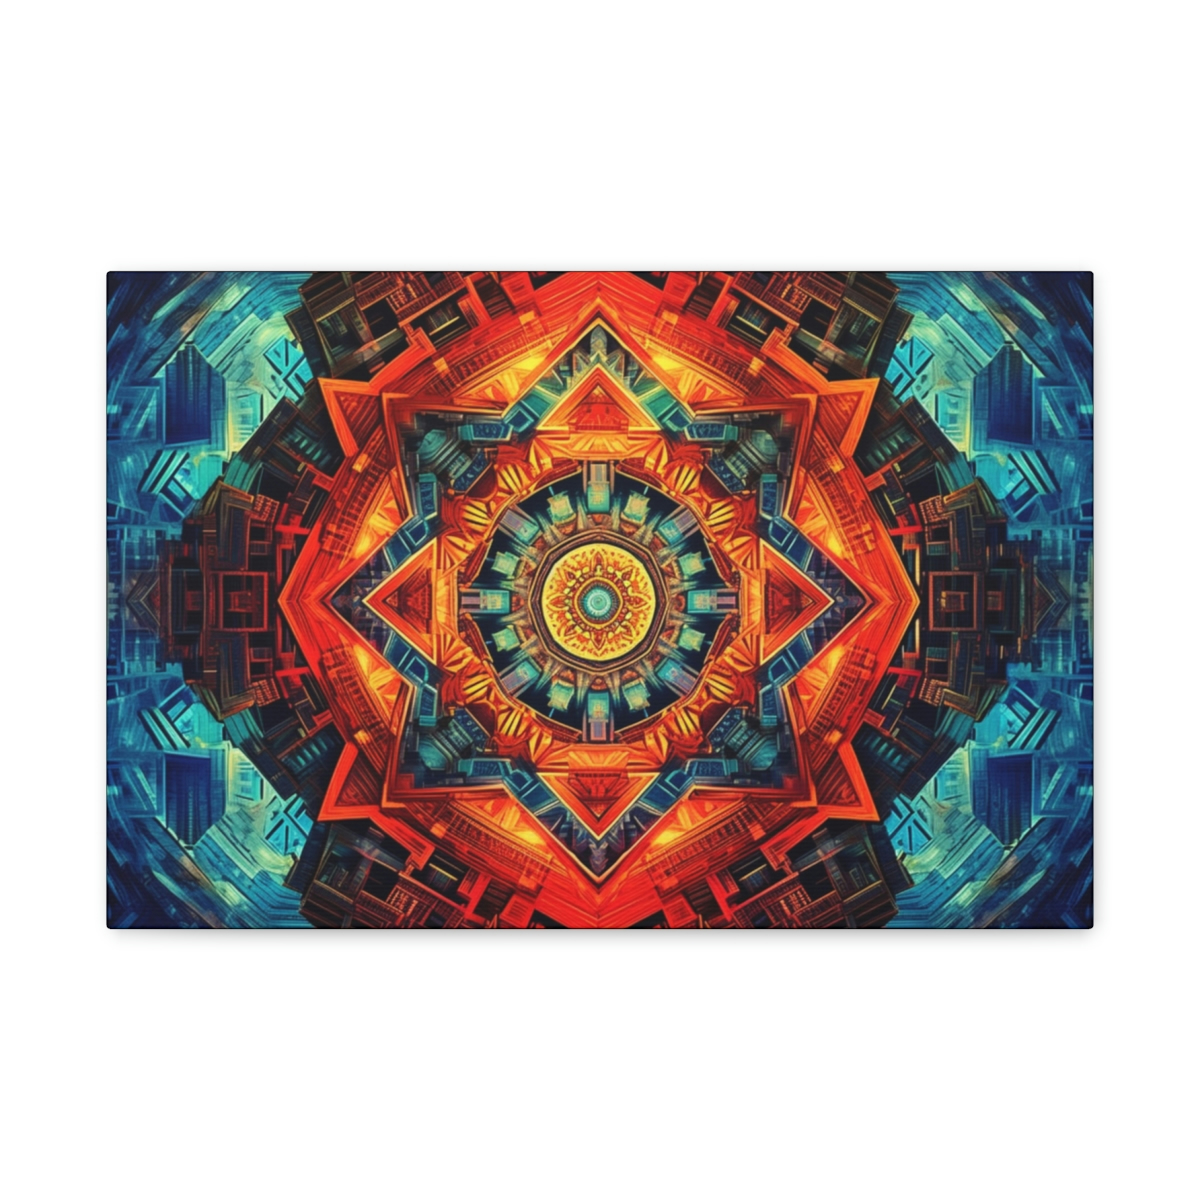 Trippy Wall Art, Home Decor, Apparel For Stoners & Psychonauts